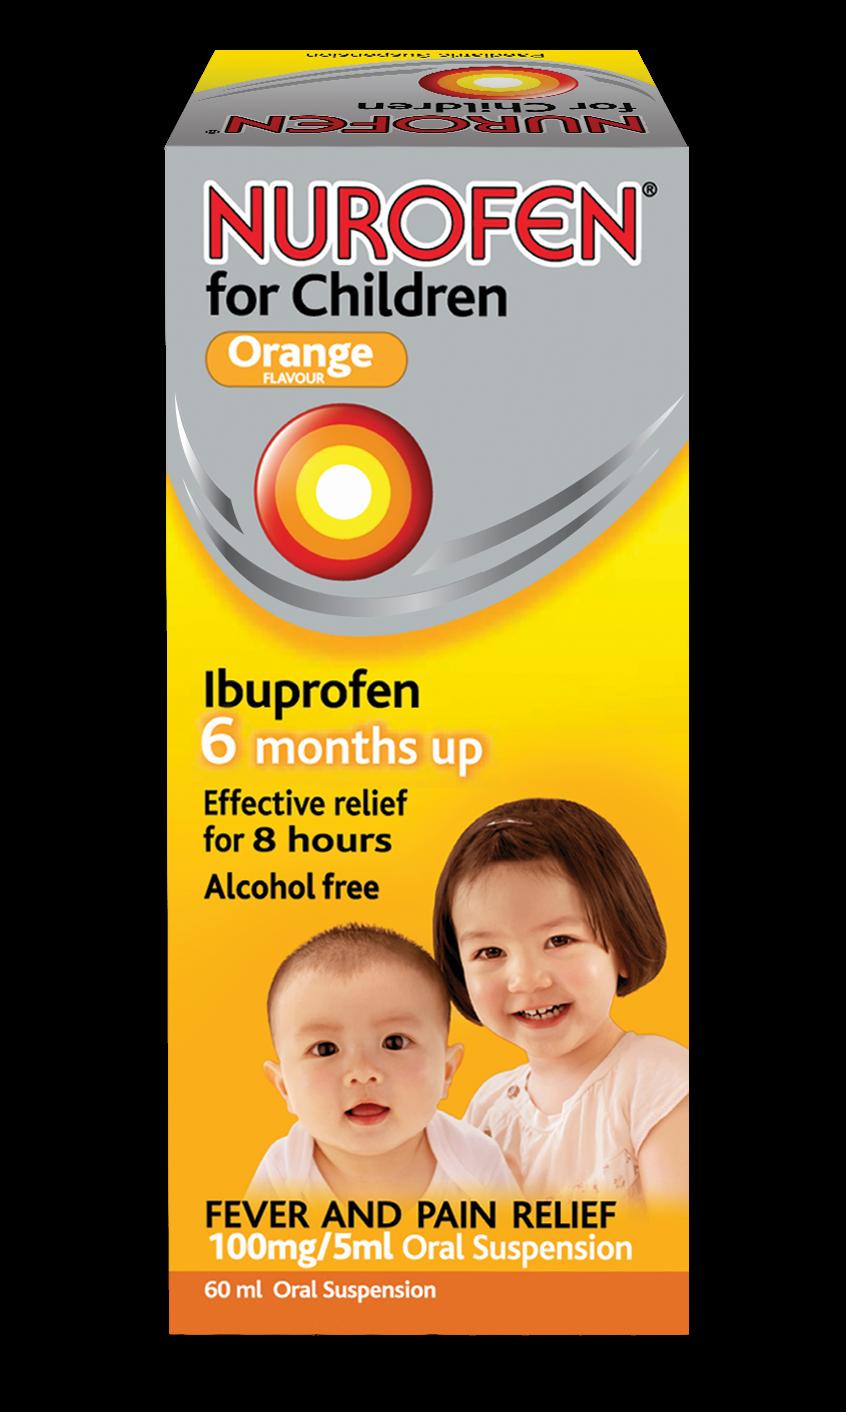 A box of Nurofen for Children, a medication for reducing fever and pain in children aged 6 months and up.